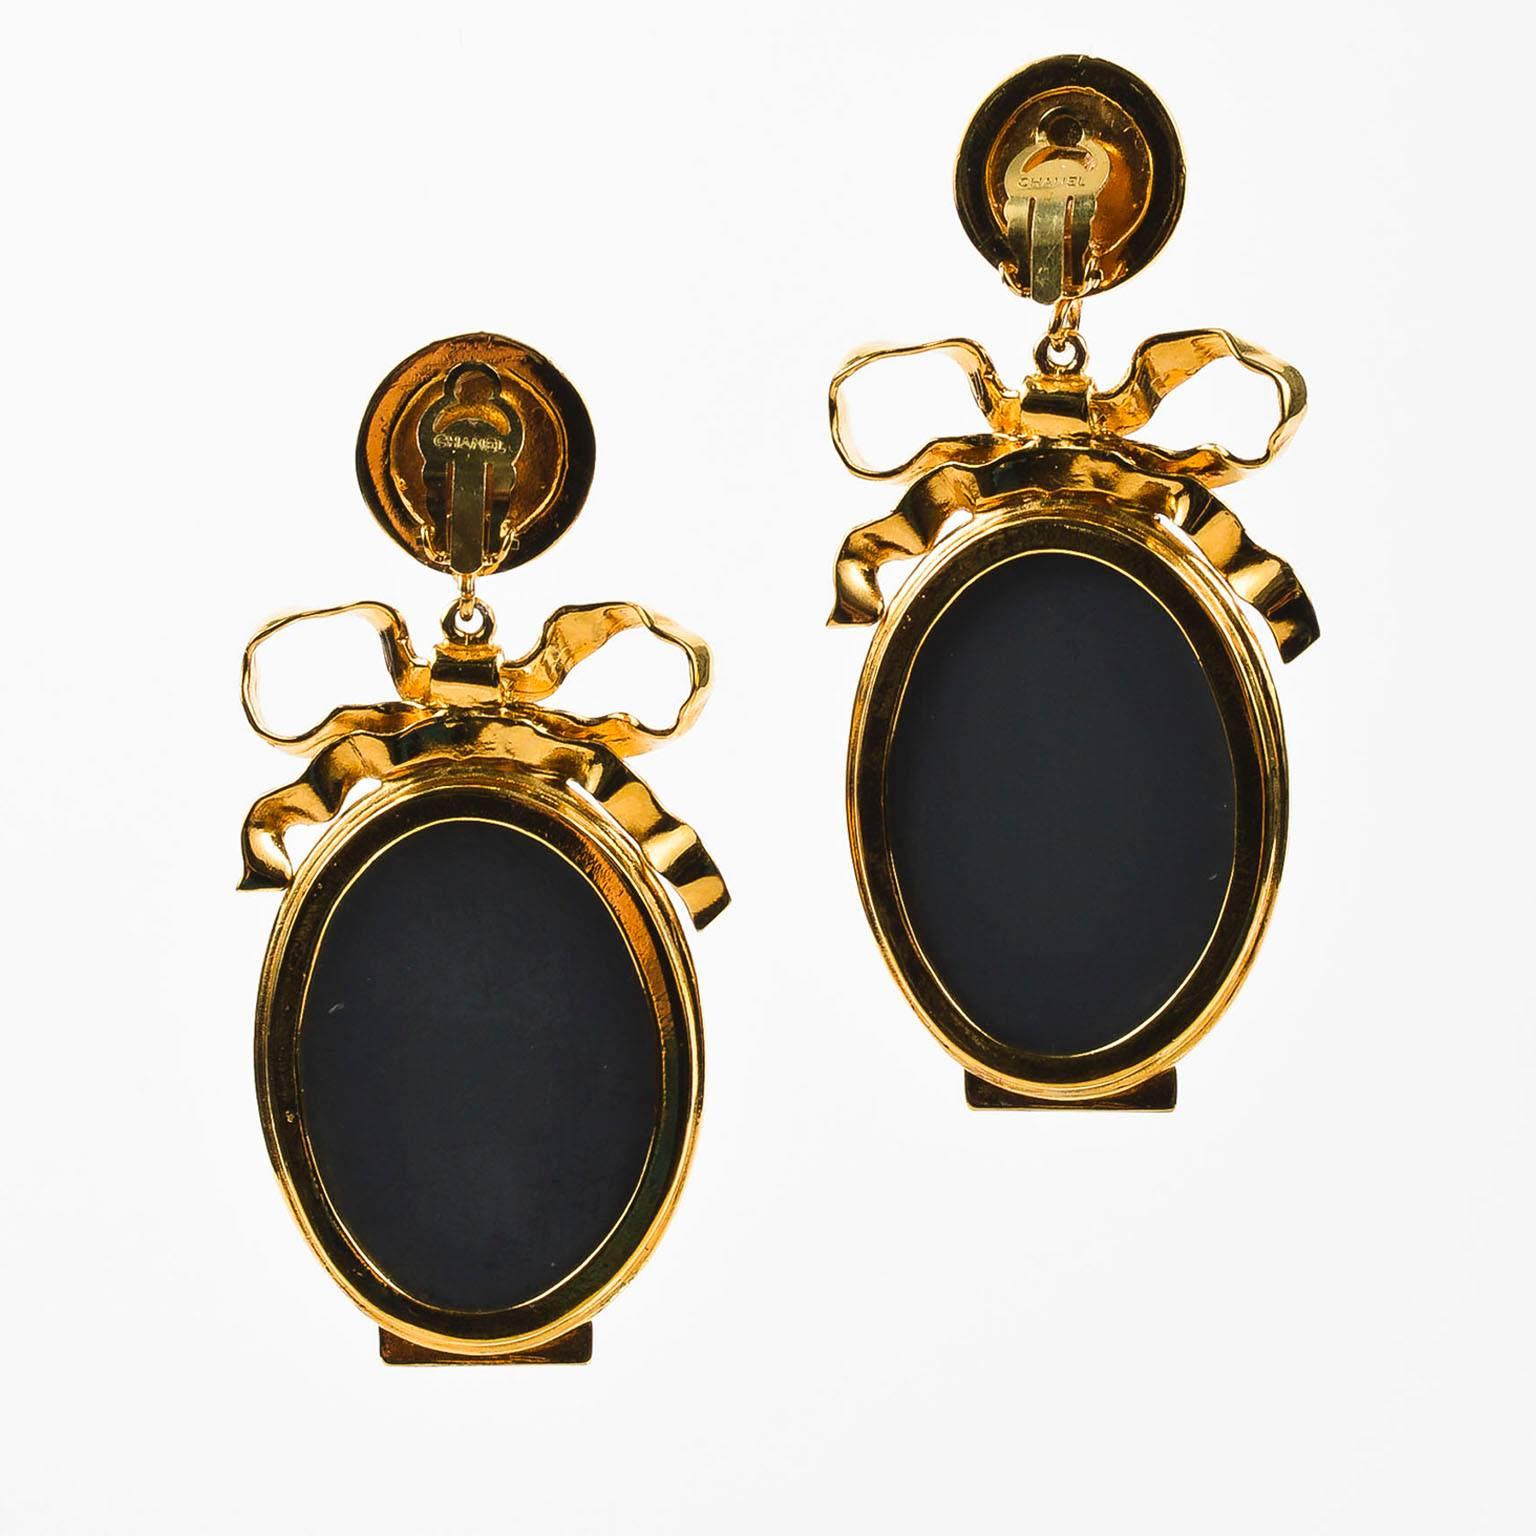 Vintage Chanel statement earrings, design circa 1970's. These oversized, whimsical earrings are an instant conversation starter, guaranteed to by envied by the most fashionable trendsetters. Wear alone to let them take center stage or pair with a